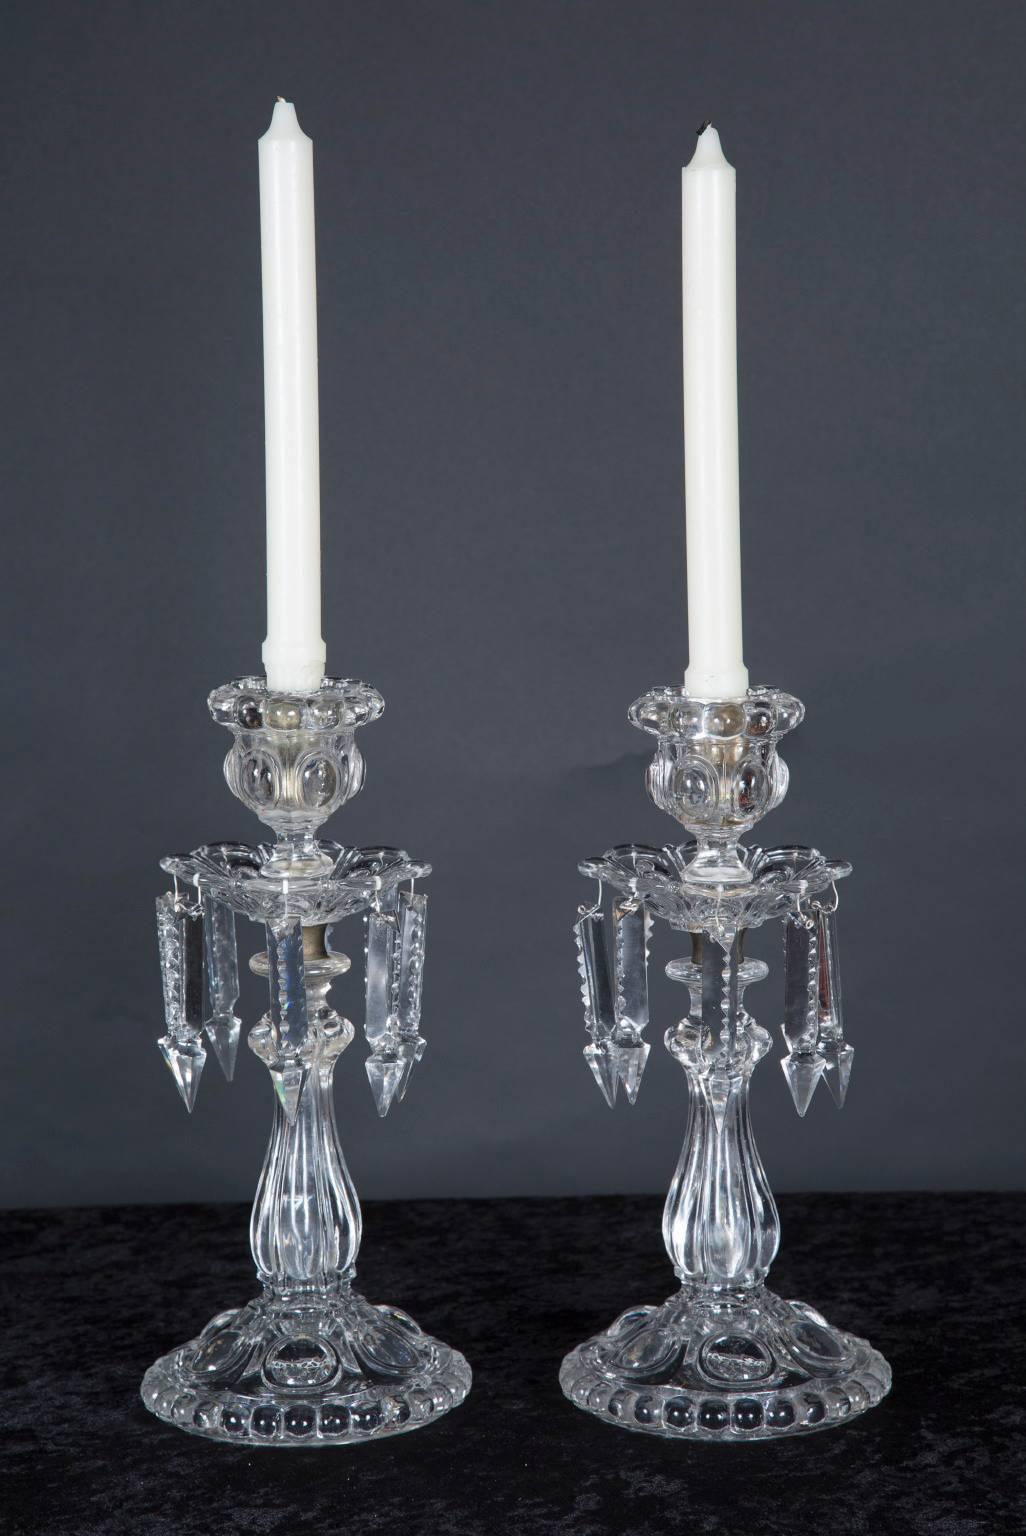 This pair of crystal lusters are made of beautiful St. Louis crystal, with a set of crystal prisms hanging down from the bobeche of each piece. A beautiful addition to any table top, watch the crystal sparkle in the candlelight in order to help set